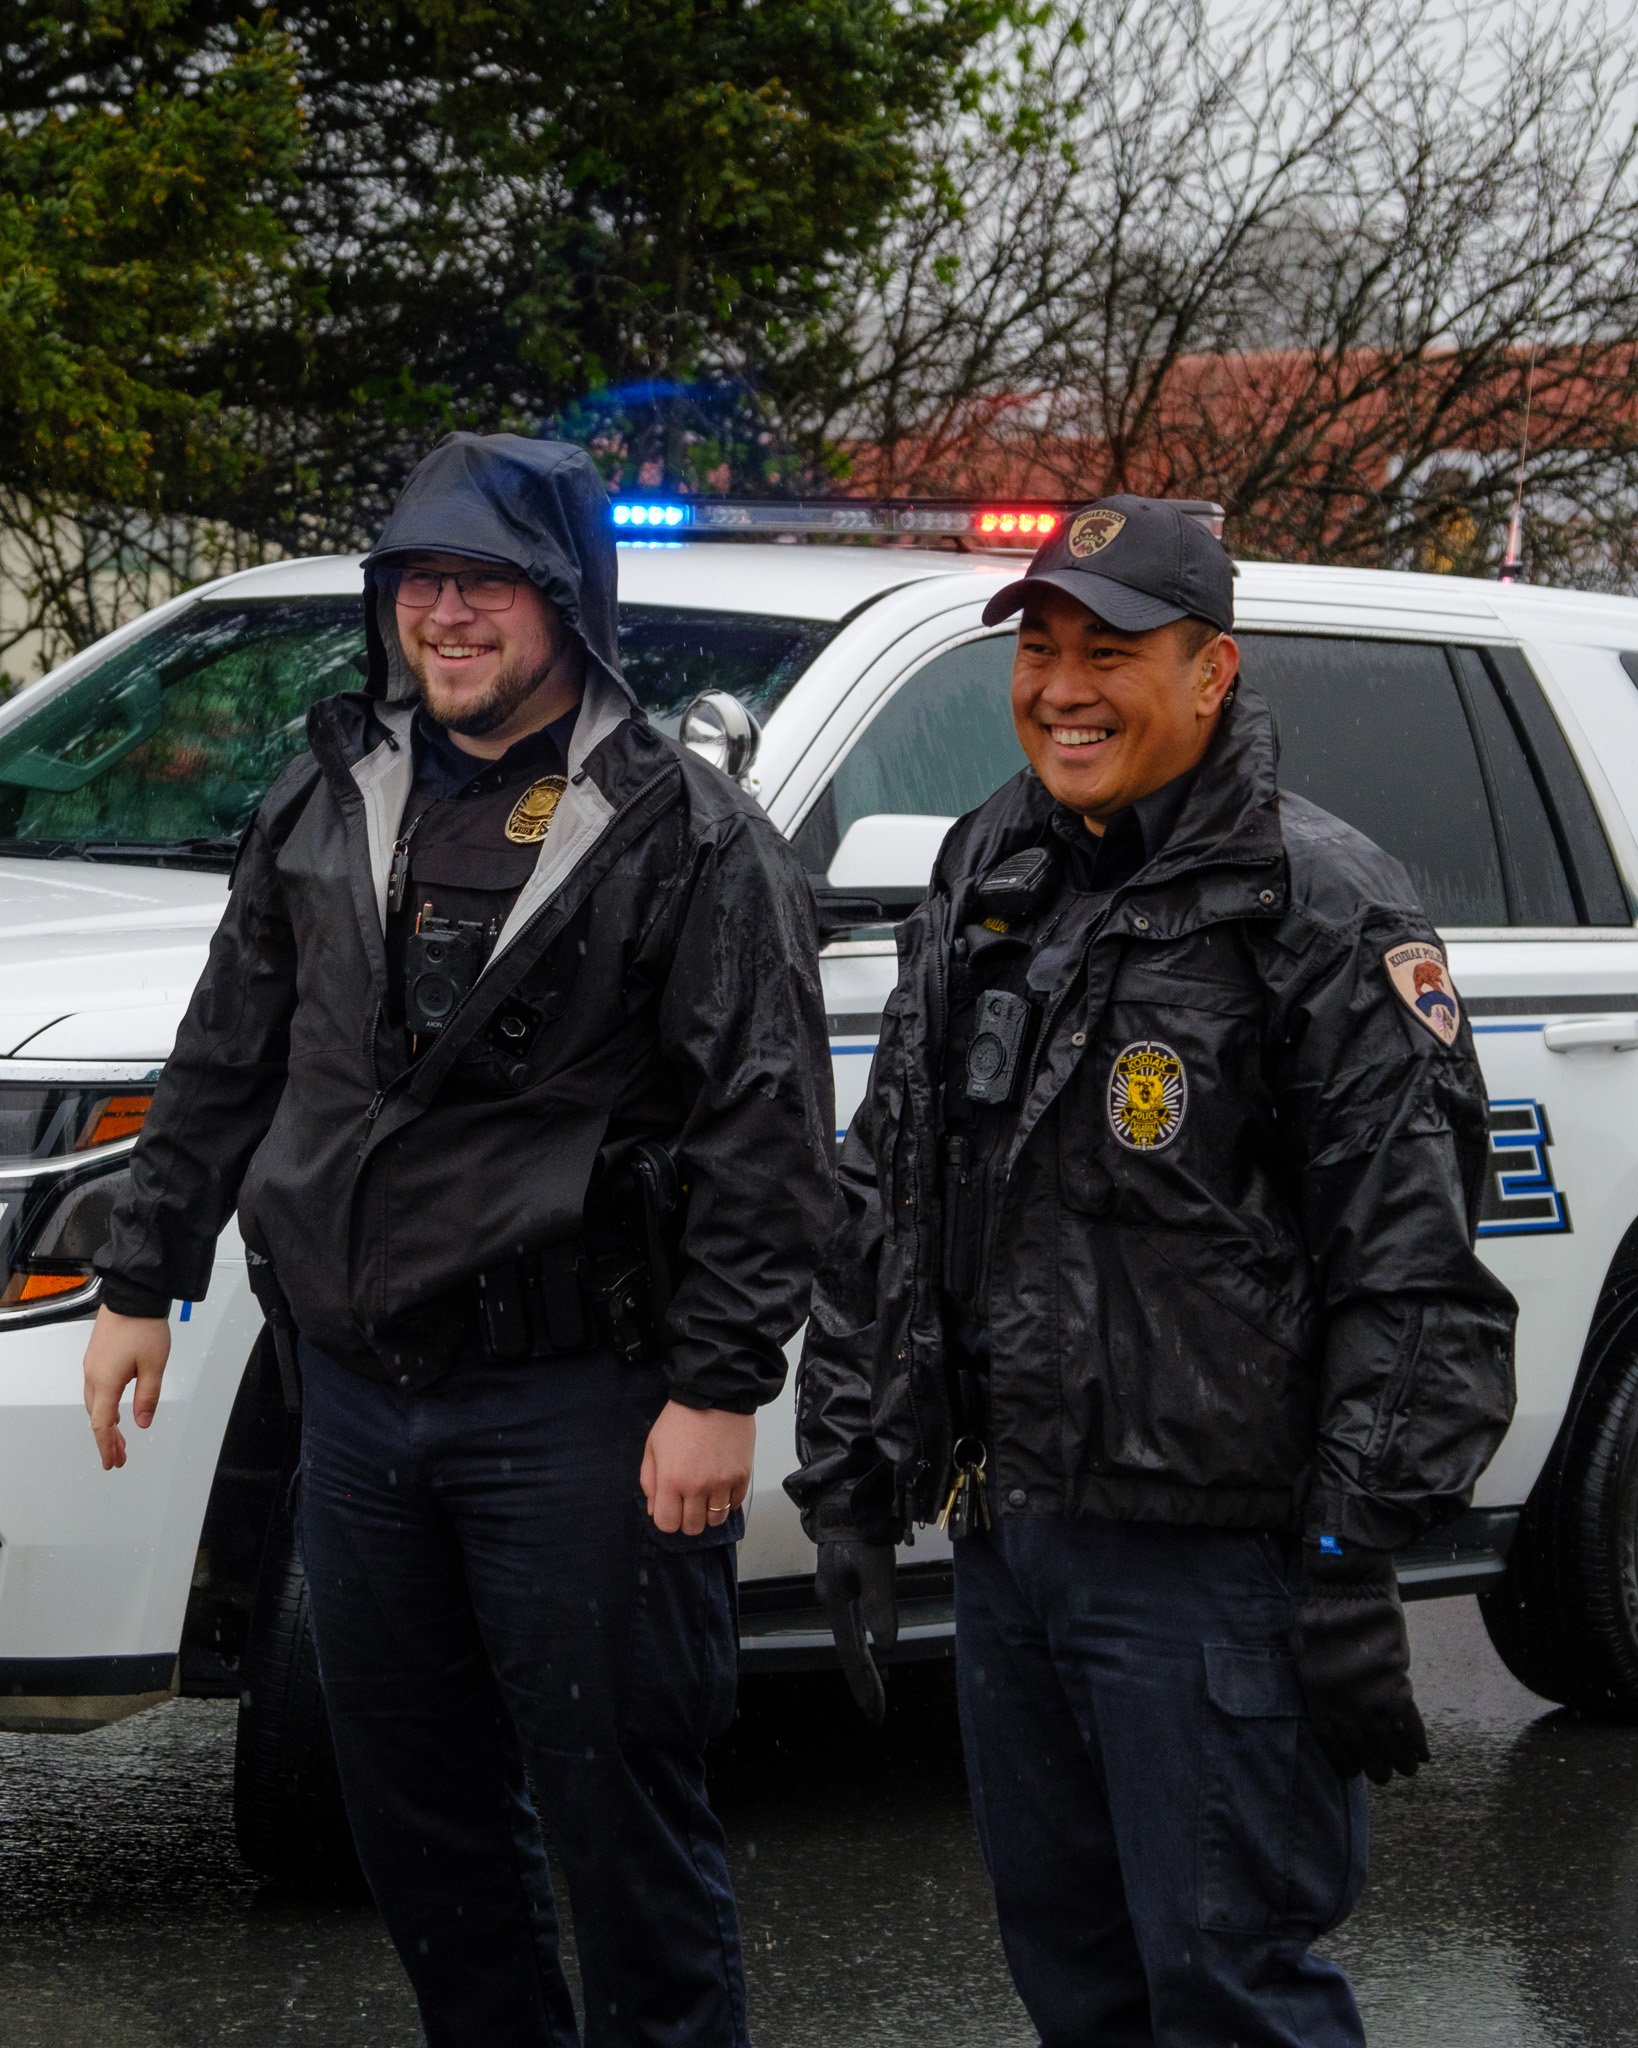 Kodiak Police officers stood by to keep the parade on course.jpg